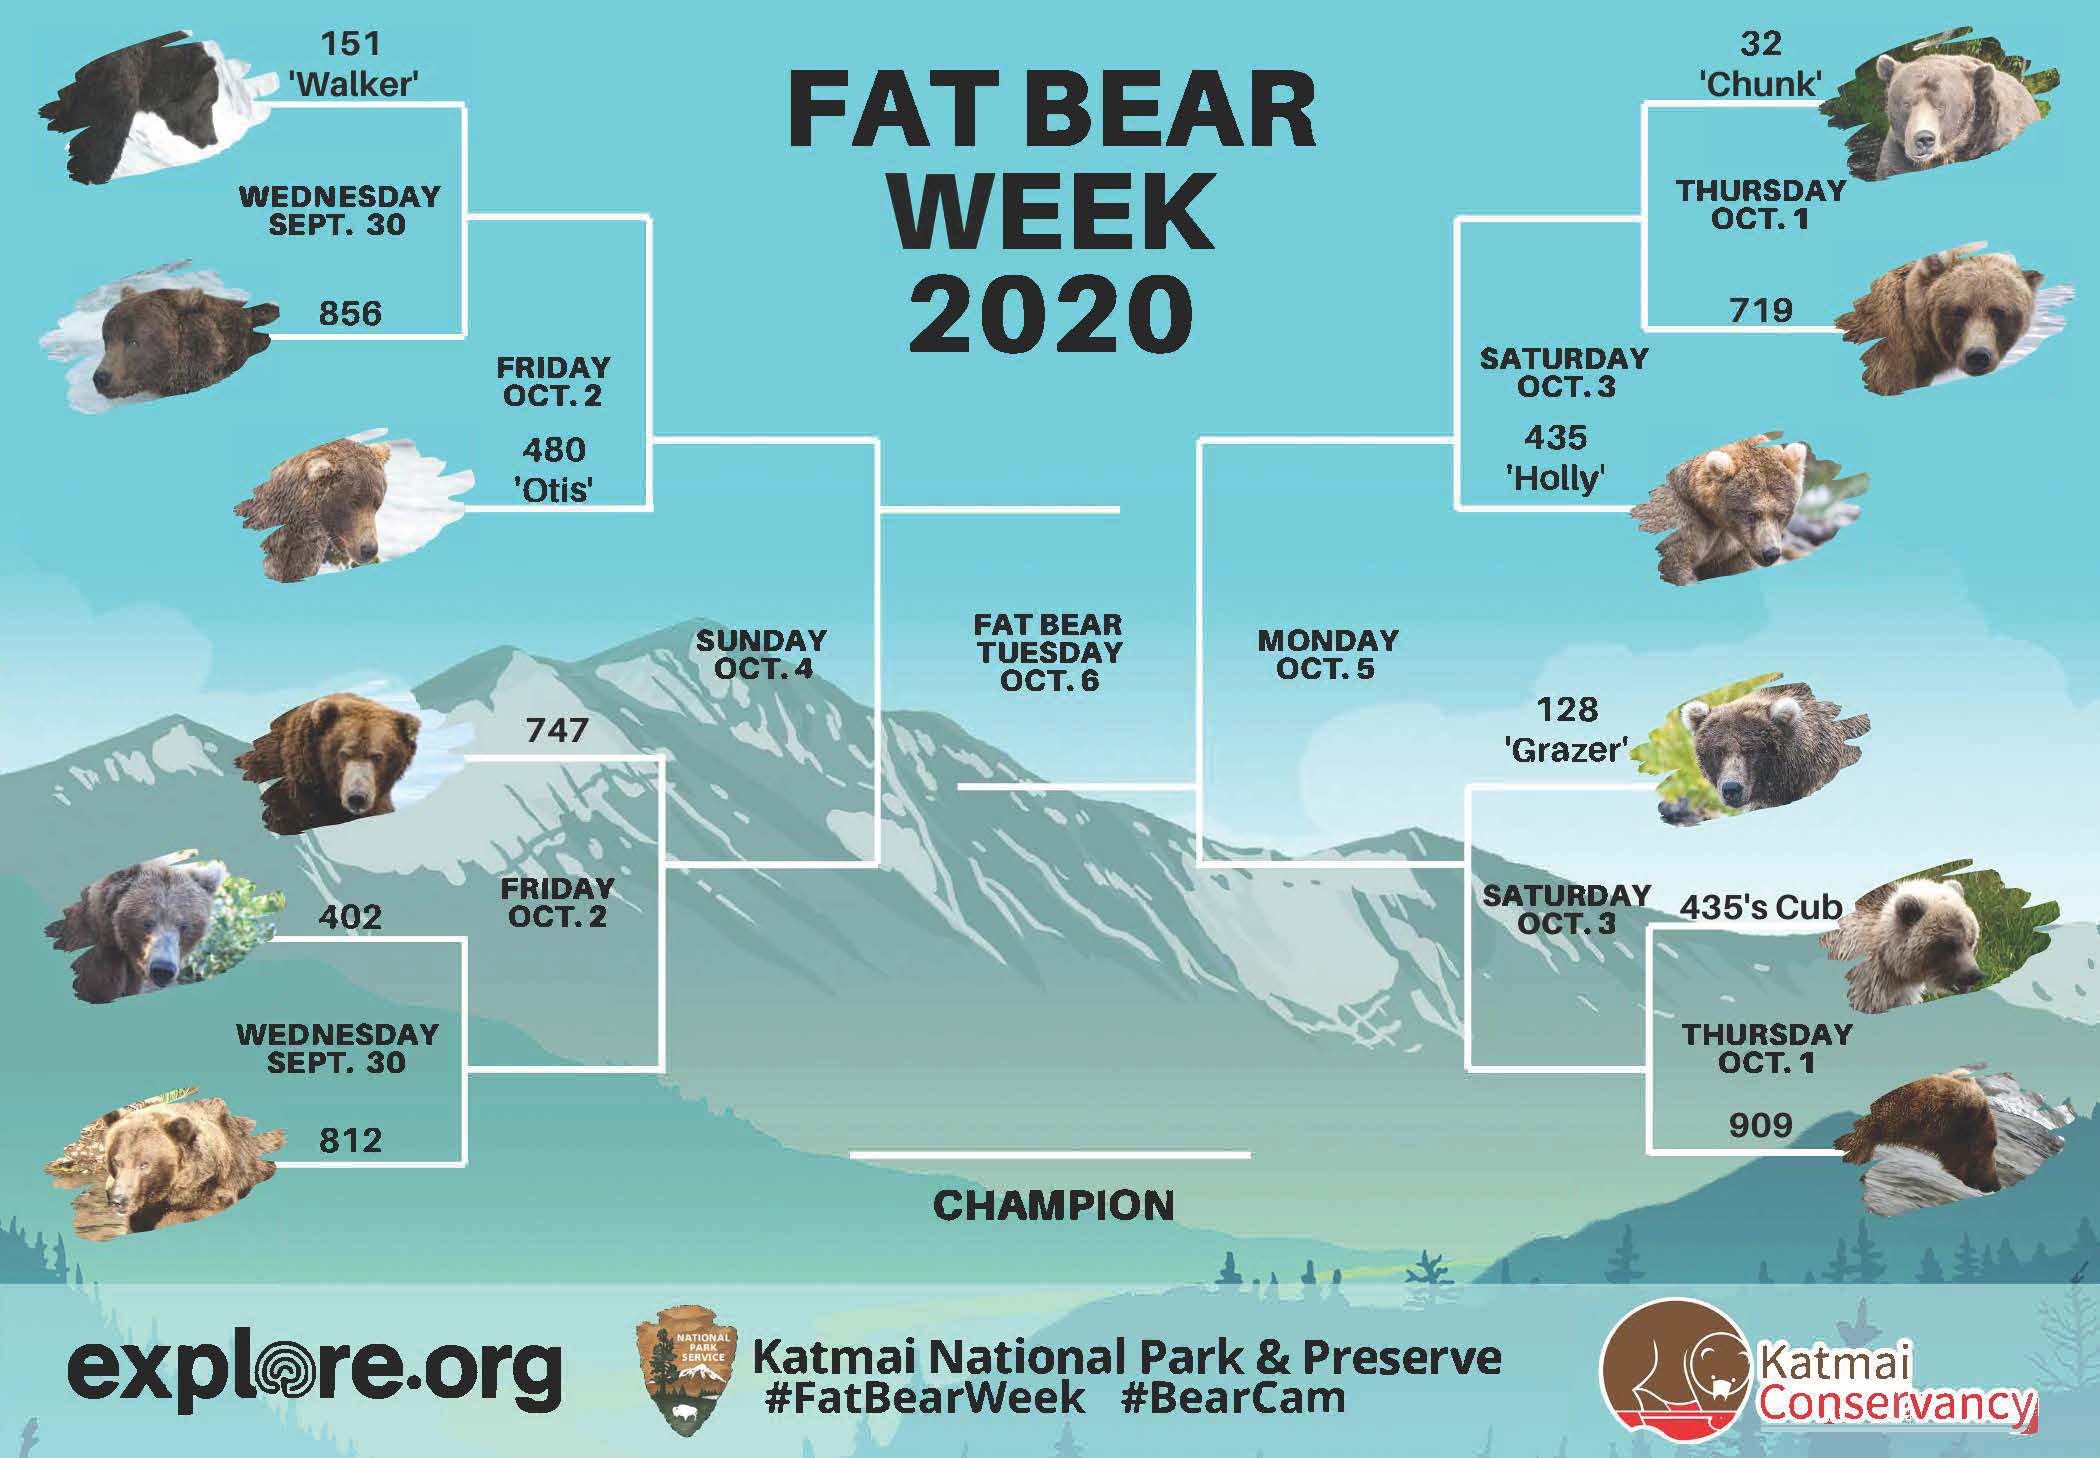 It’s that time of year again... Fat Bear week! Here’s how you can